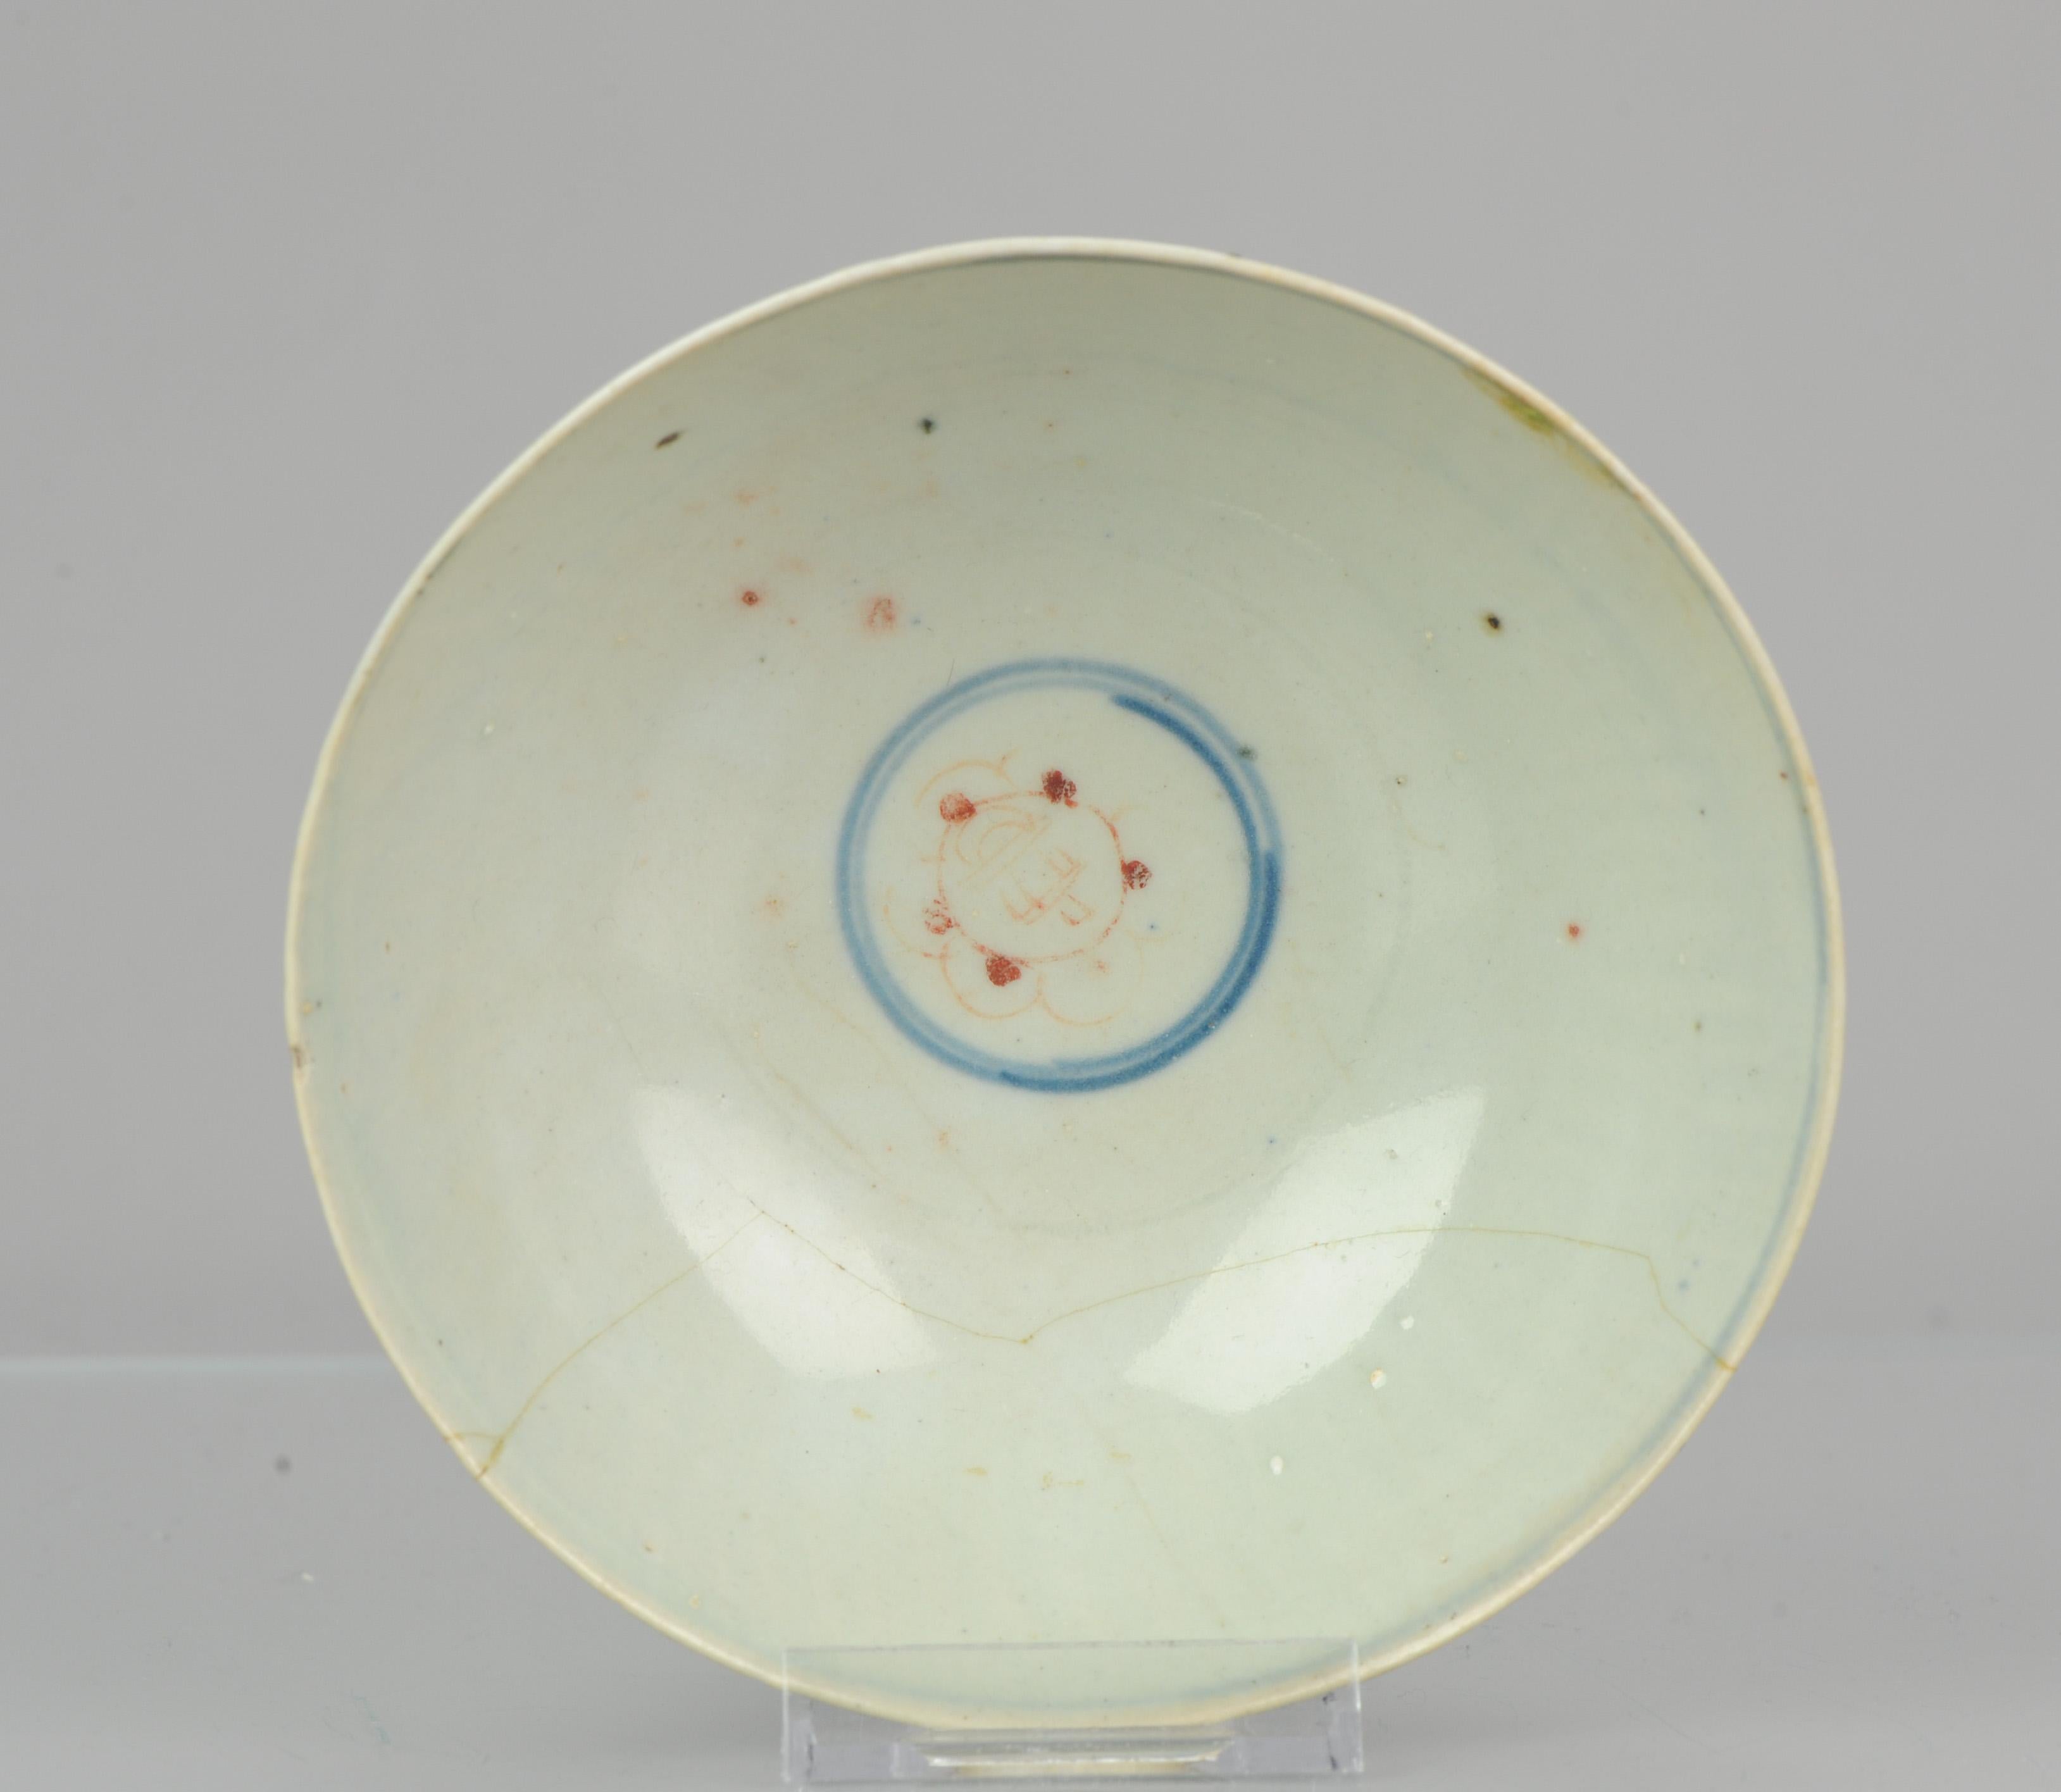 Antique Chinese Porcelain Kitchen Ch'ing Qing Plate South East Asia Market, 19C In Good Condition For Sale In Amsterdam, Noord Holland